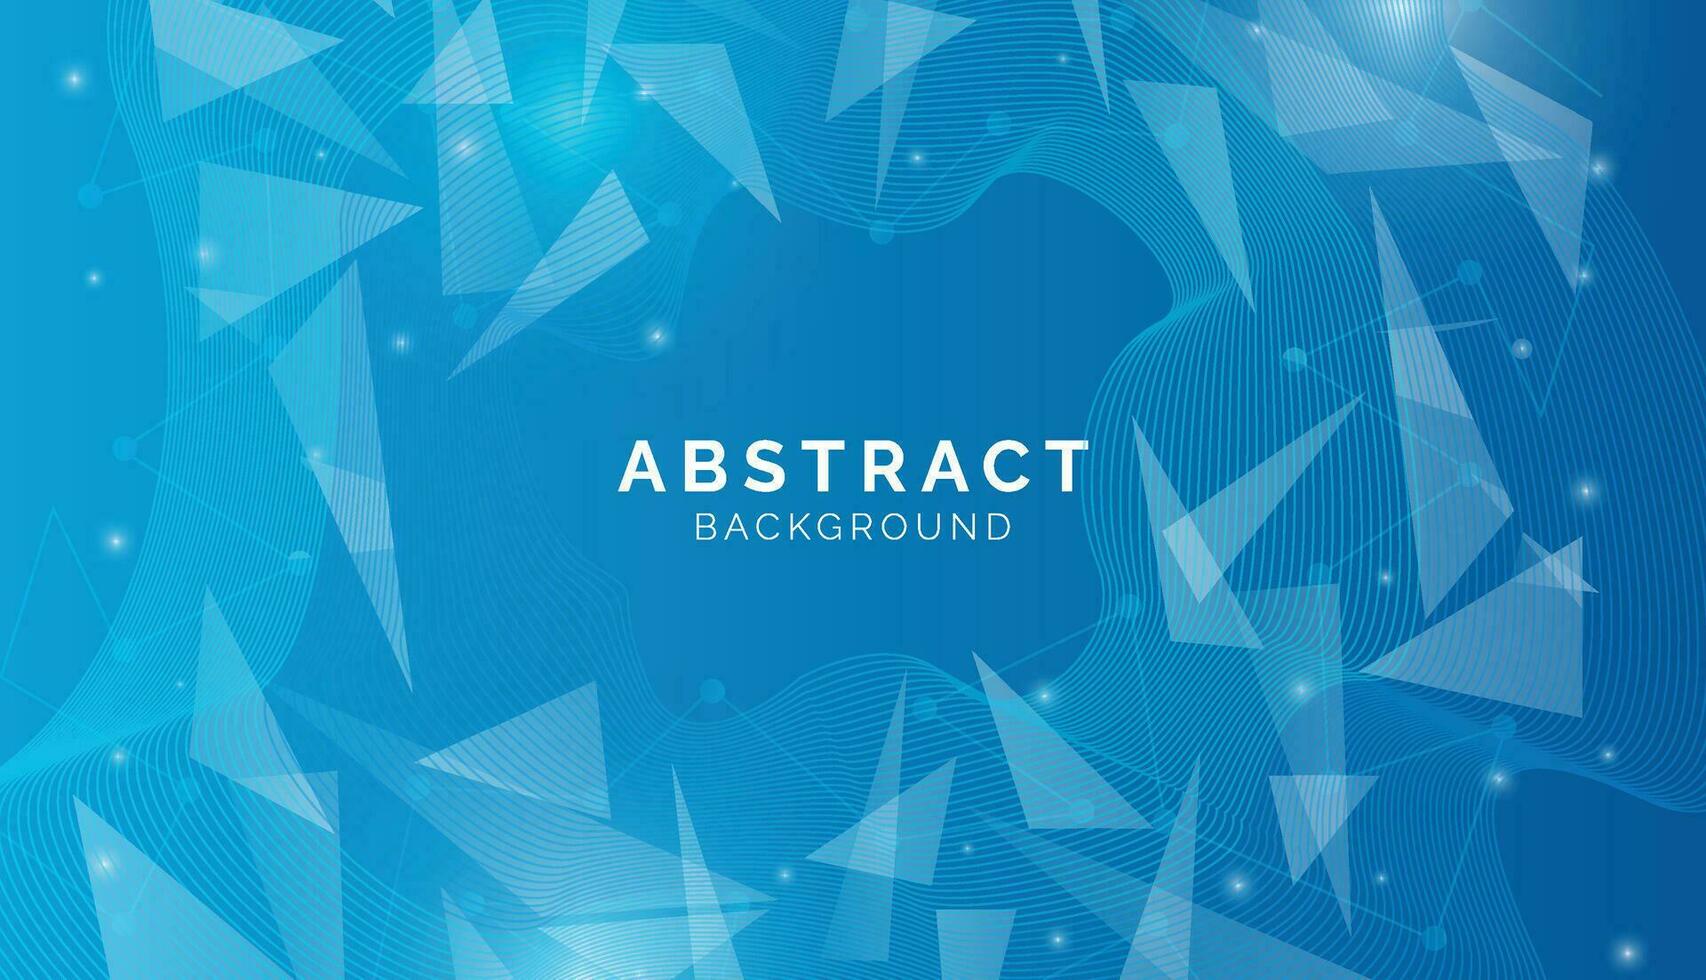 Abstract background with gradient lines crystal shapes and blue composition, modern template for website, banner art, poster design, geometric vector illustration